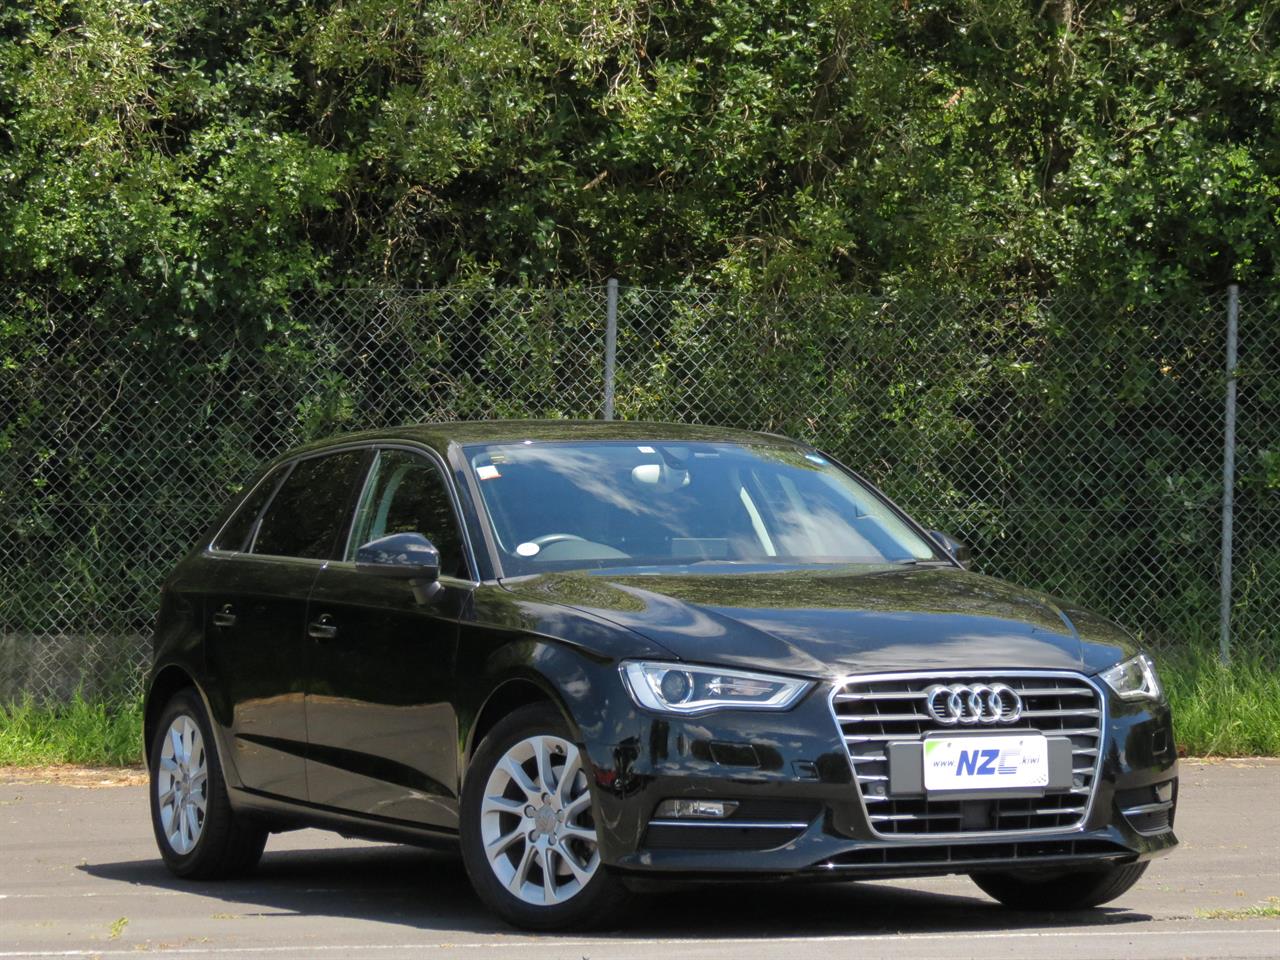 NZC 2014 Audi A3 just arrived to Auckland